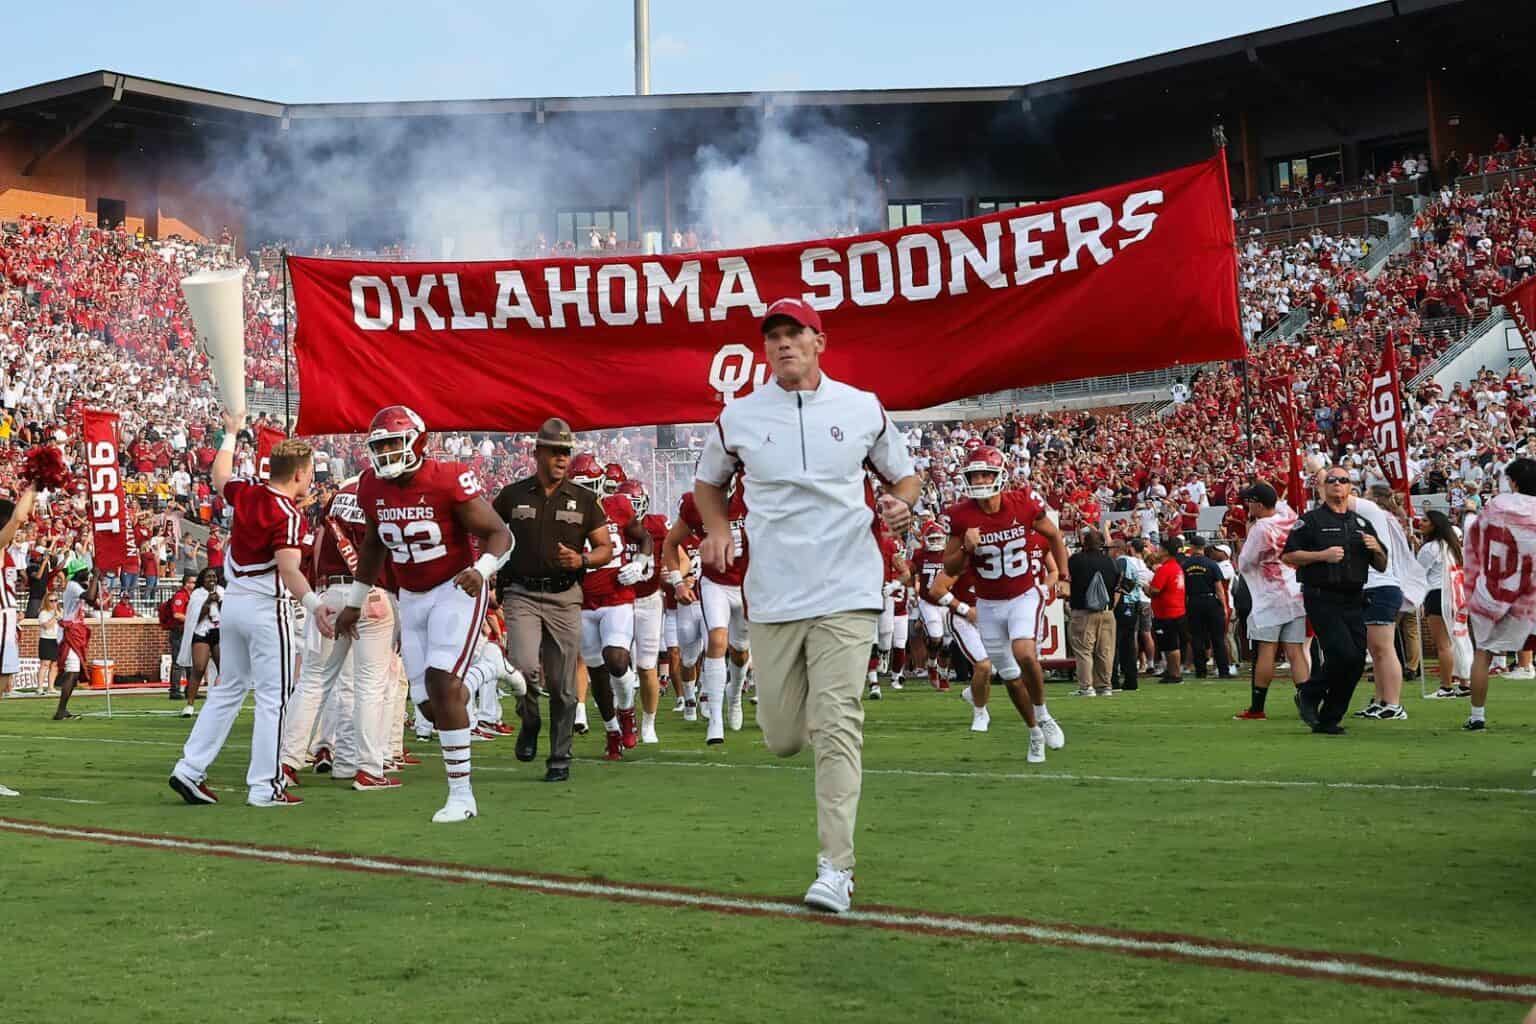 Oklahoma, SMU schedule football series for 2023, 2027